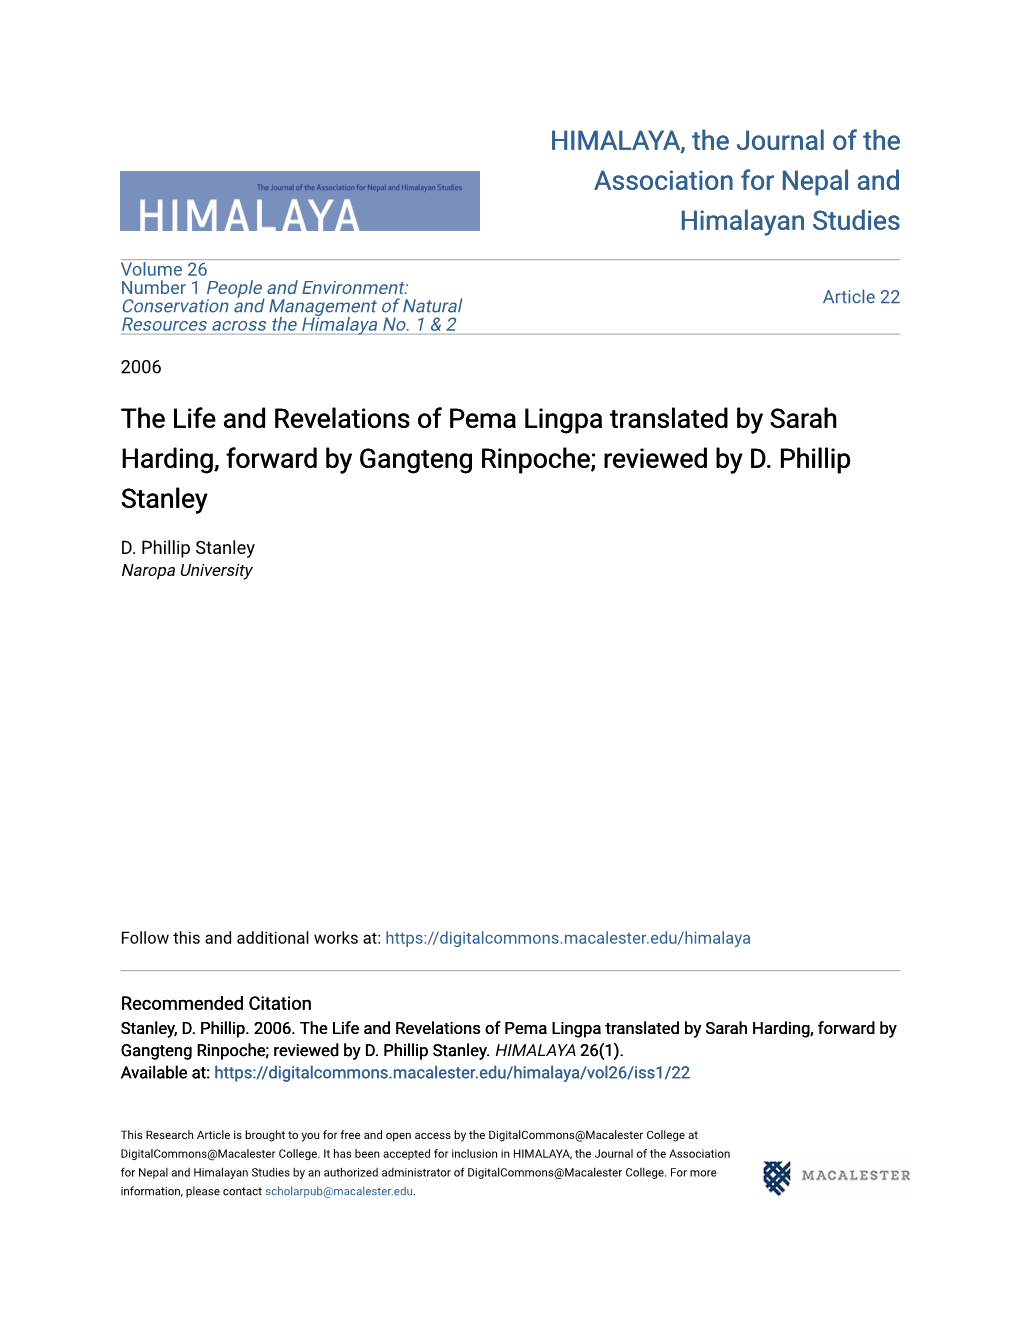 The Life and Revelations of Pema Lingpa Translated by Sarah Harding, Forward by Gangteng Rinpoche; Reviewed by D